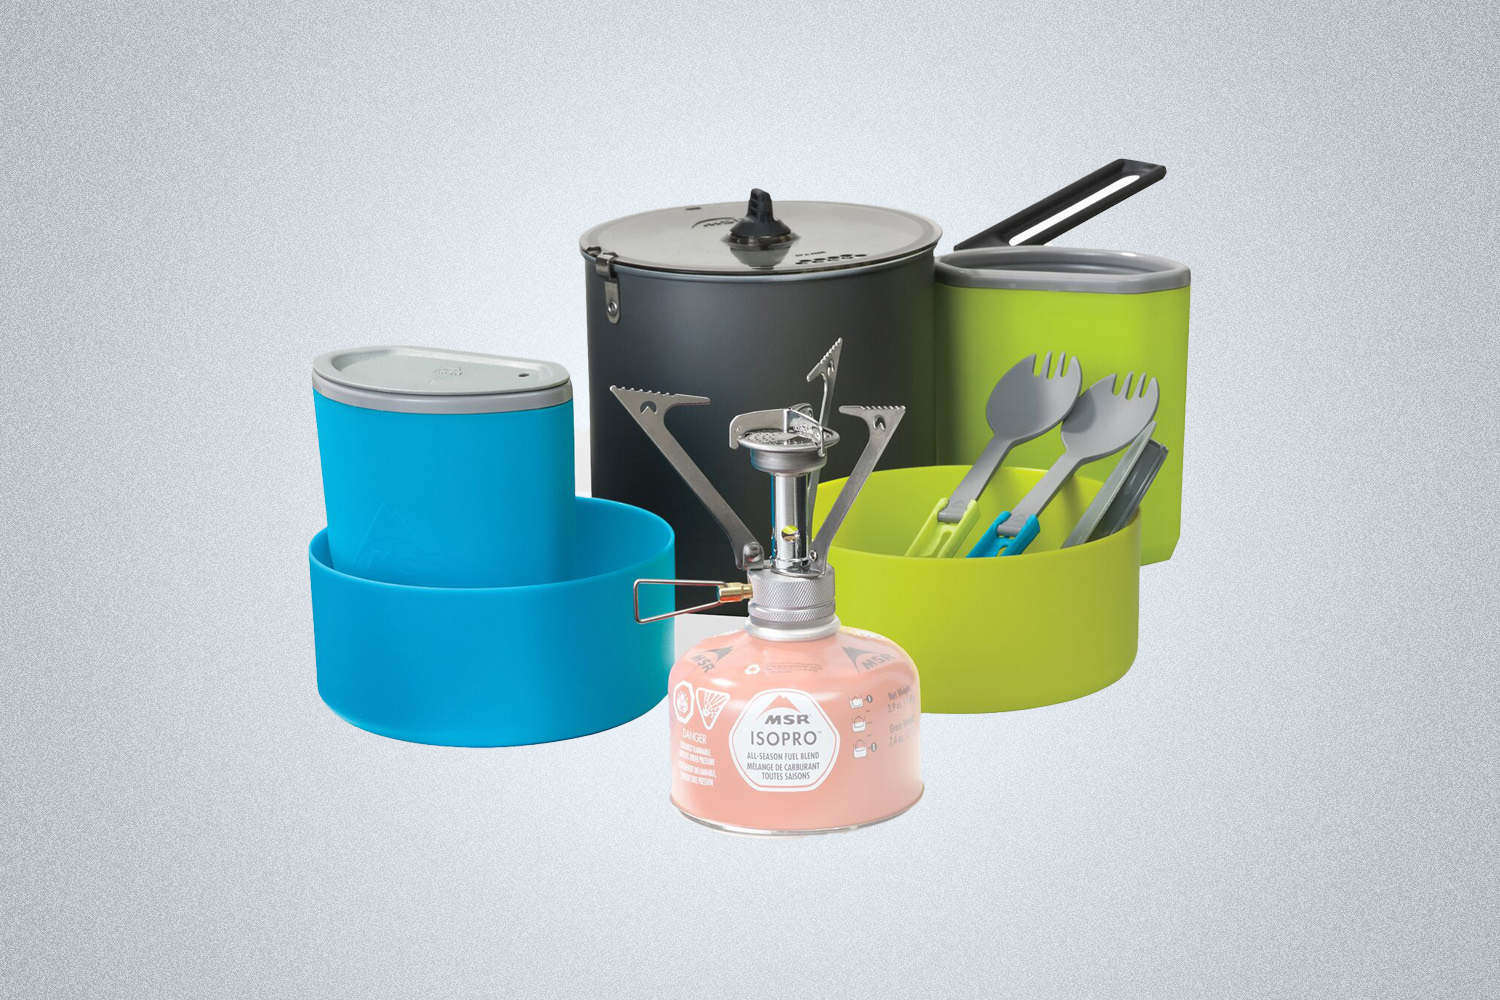 MSR PocketRocket Stove Kit in assorted colors for cooking, preparing food and eating in the backcountry